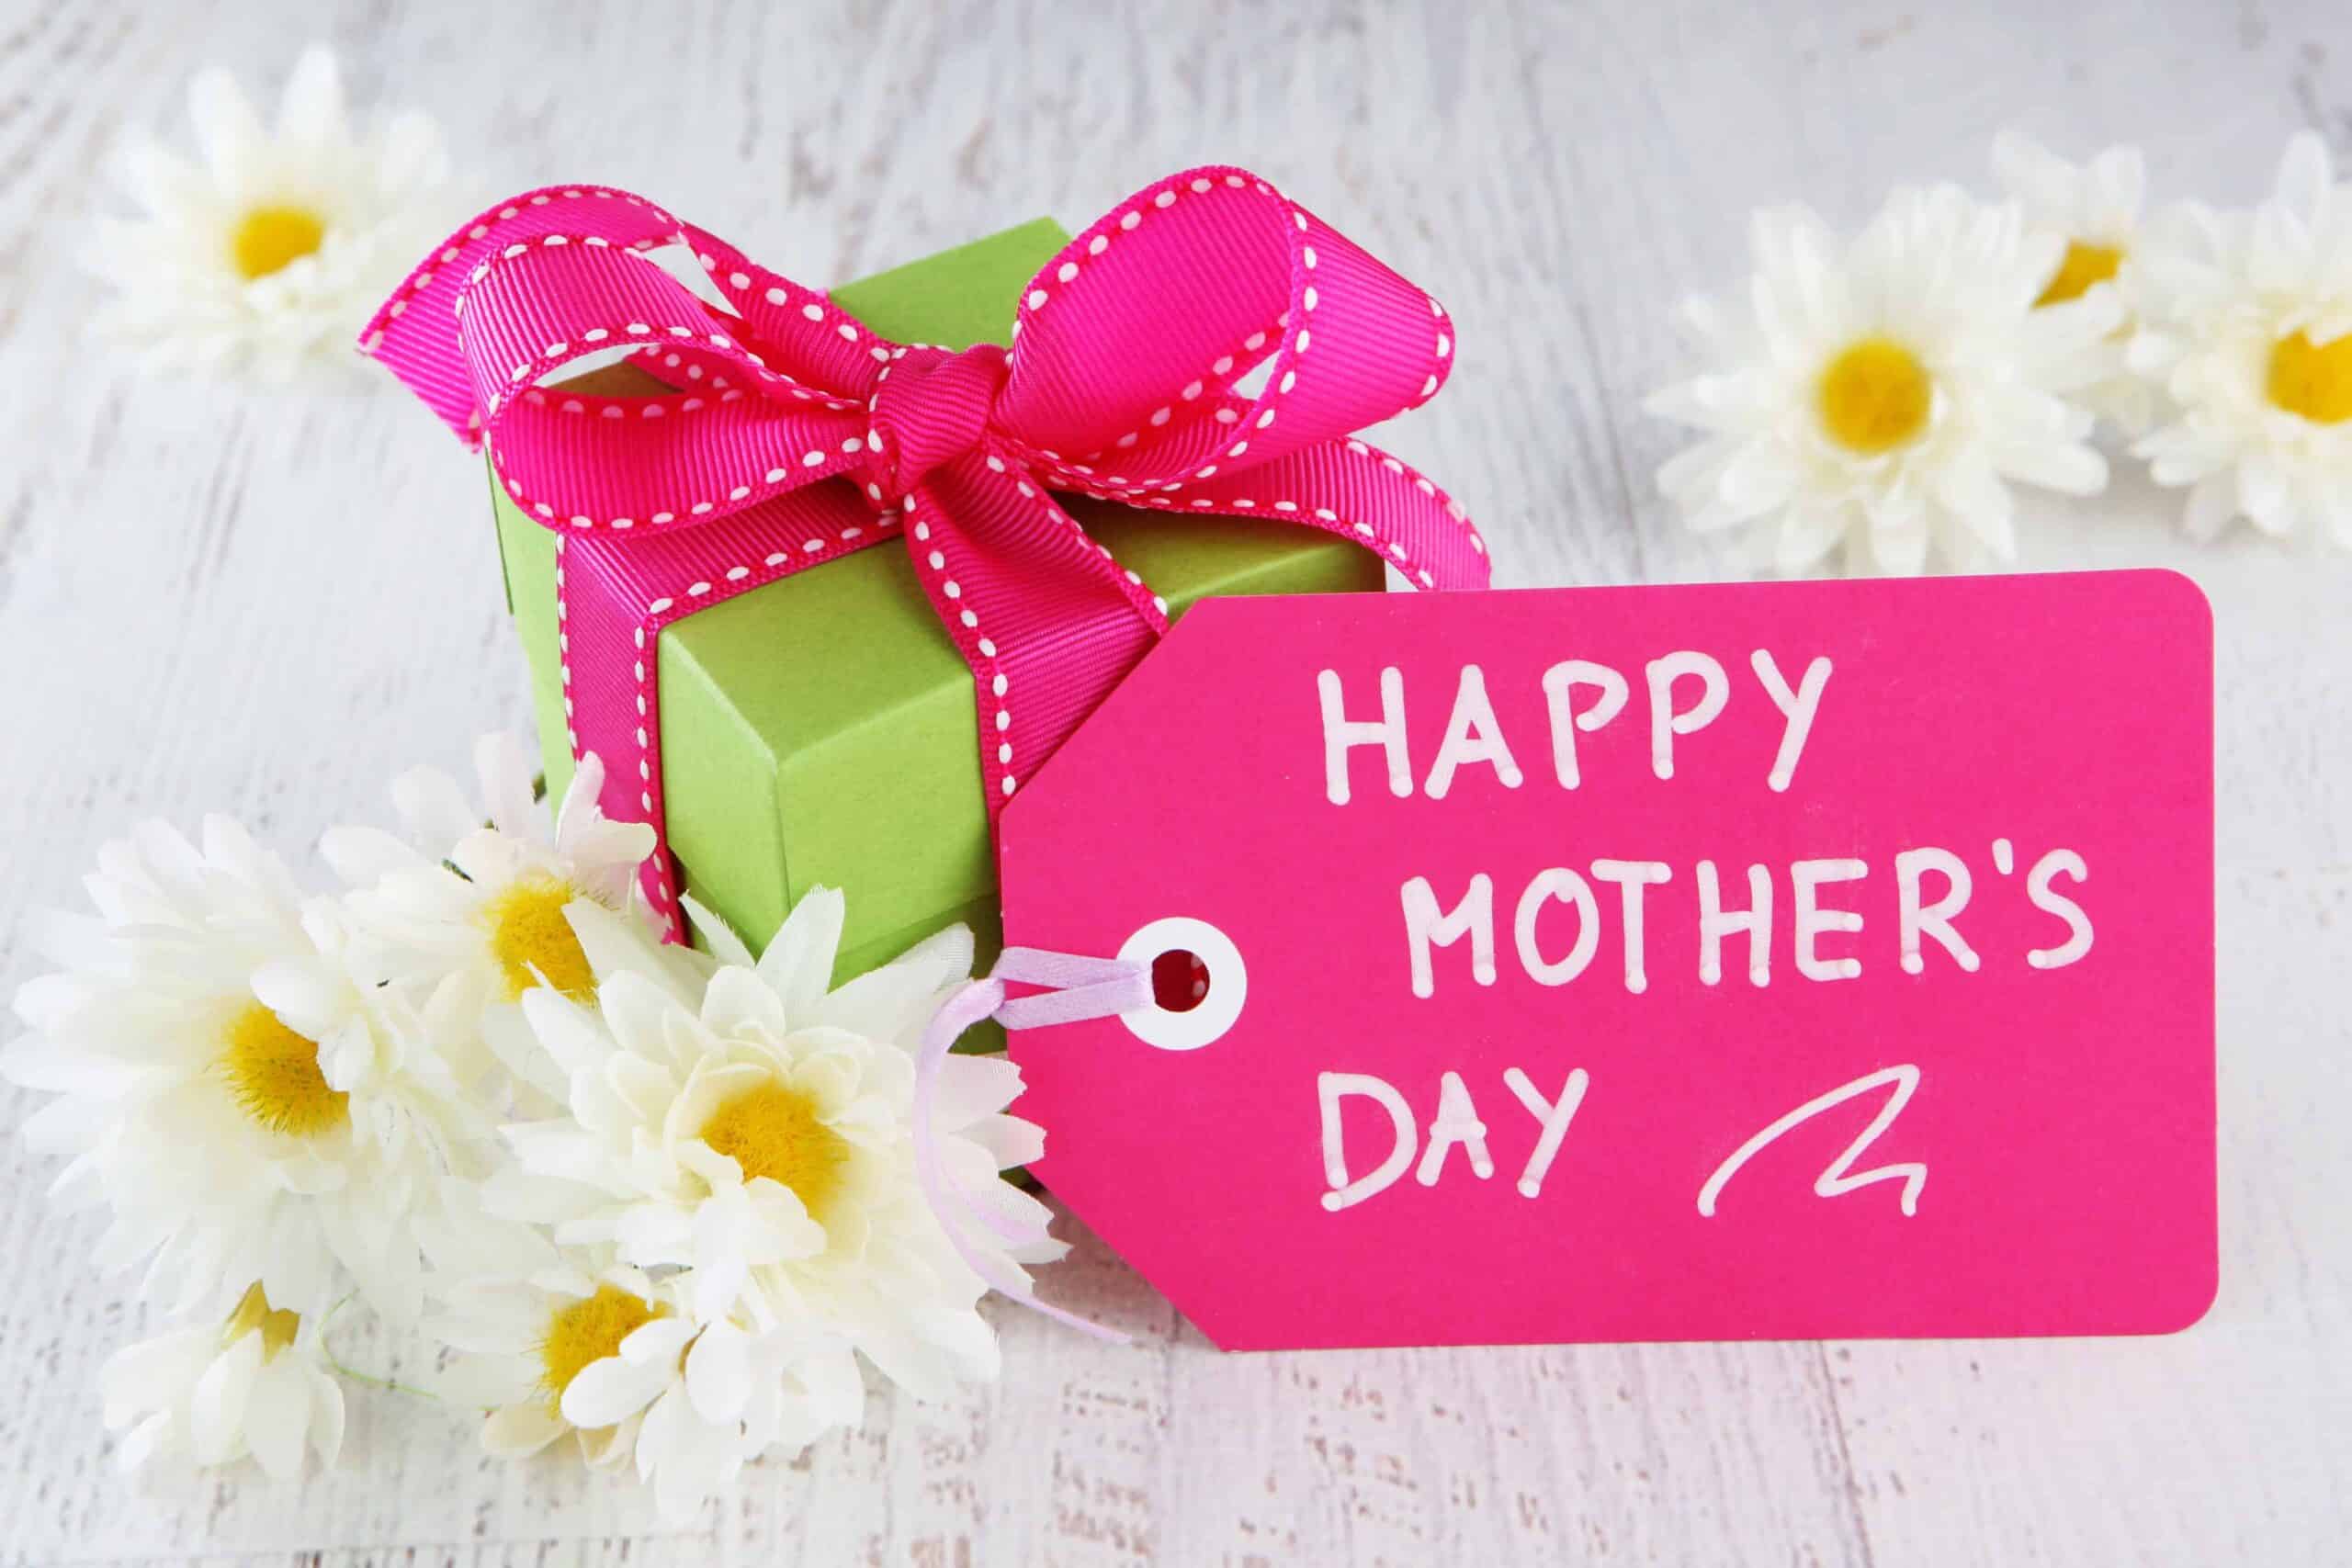 https://www.etiquetteschoolofamerica.com/wp-content/uploads/2019/05/Mothers-Day-Gift-Guide-and-What-Mom-Really-Wants-scaled.jpeg